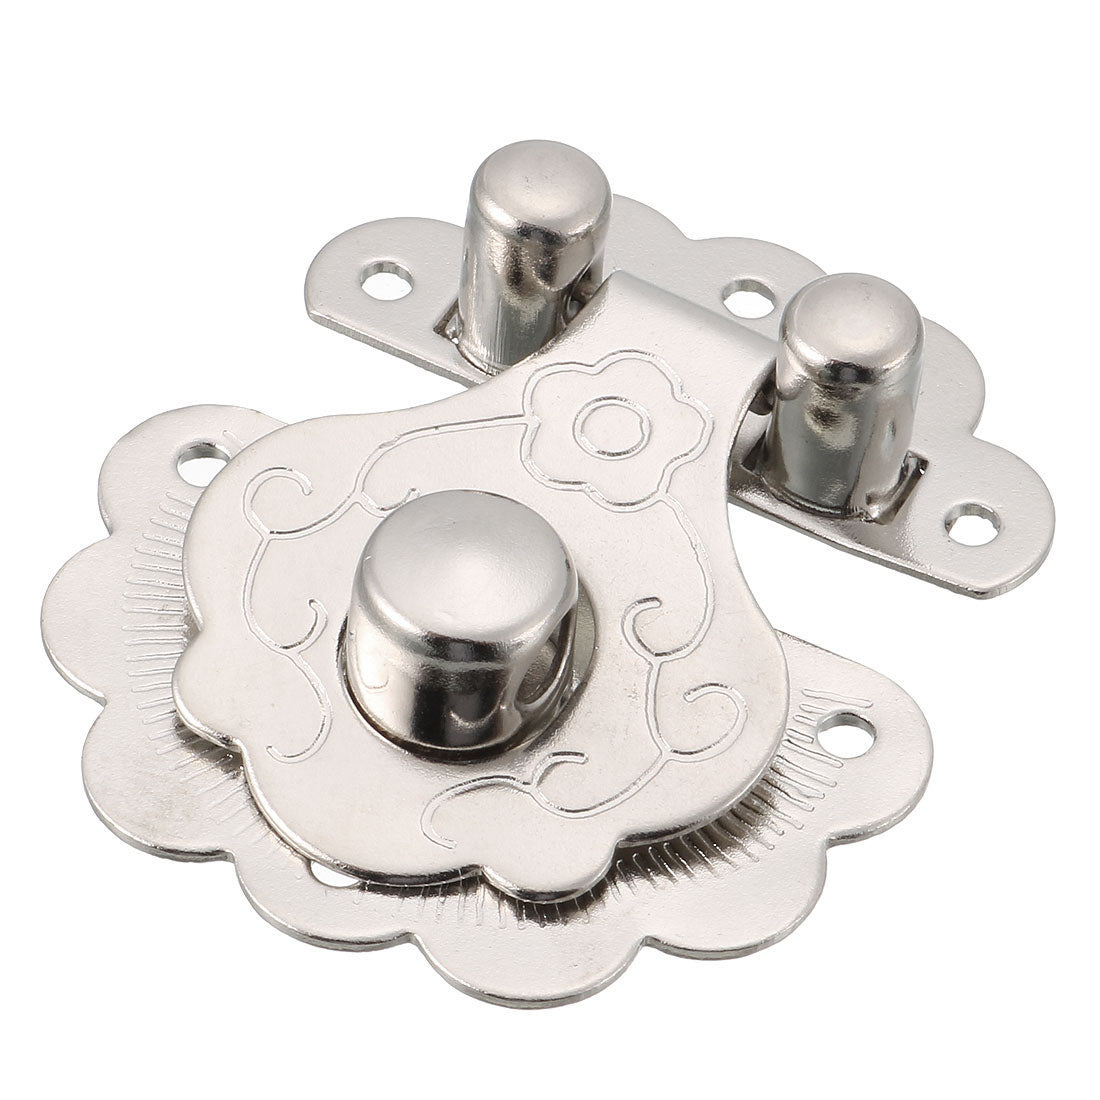 uxcell Uxcell Jewelry Box Flower Shaped Latches Hasp Catch Lock Silver Tone 33x32x10mm 2pcs